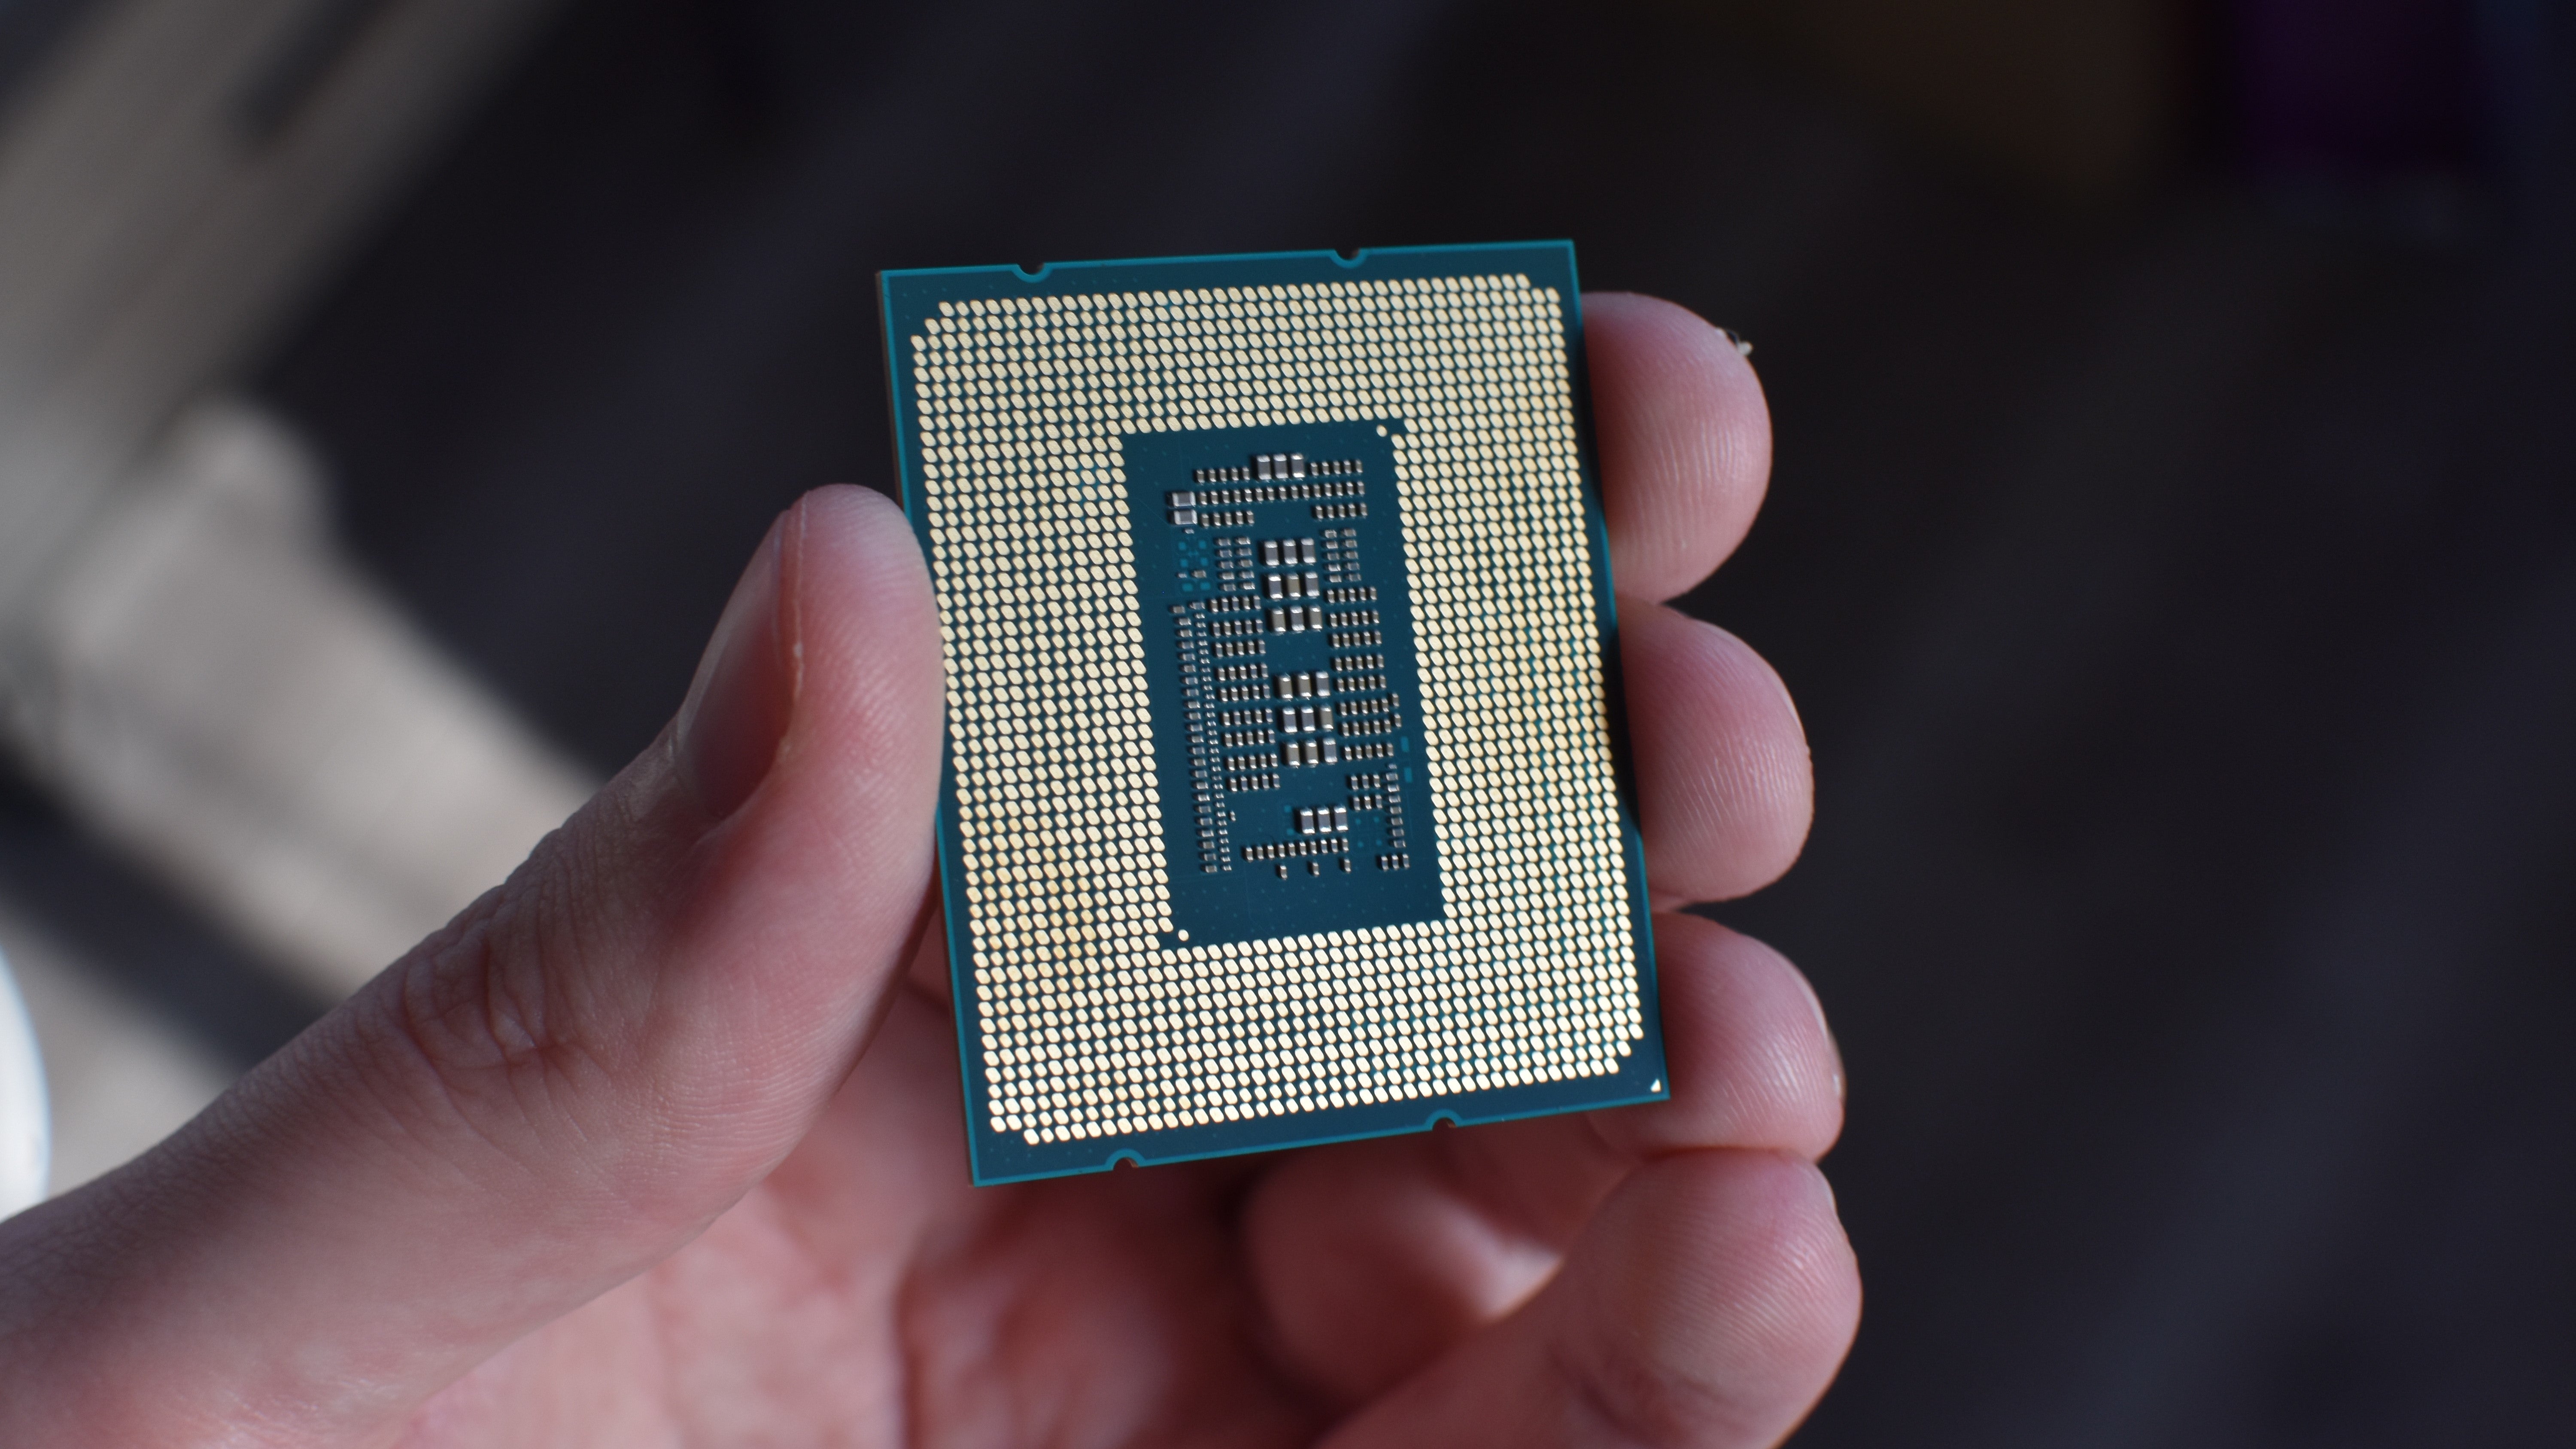 The rear side of an Intel Core i9-12900K CPU.